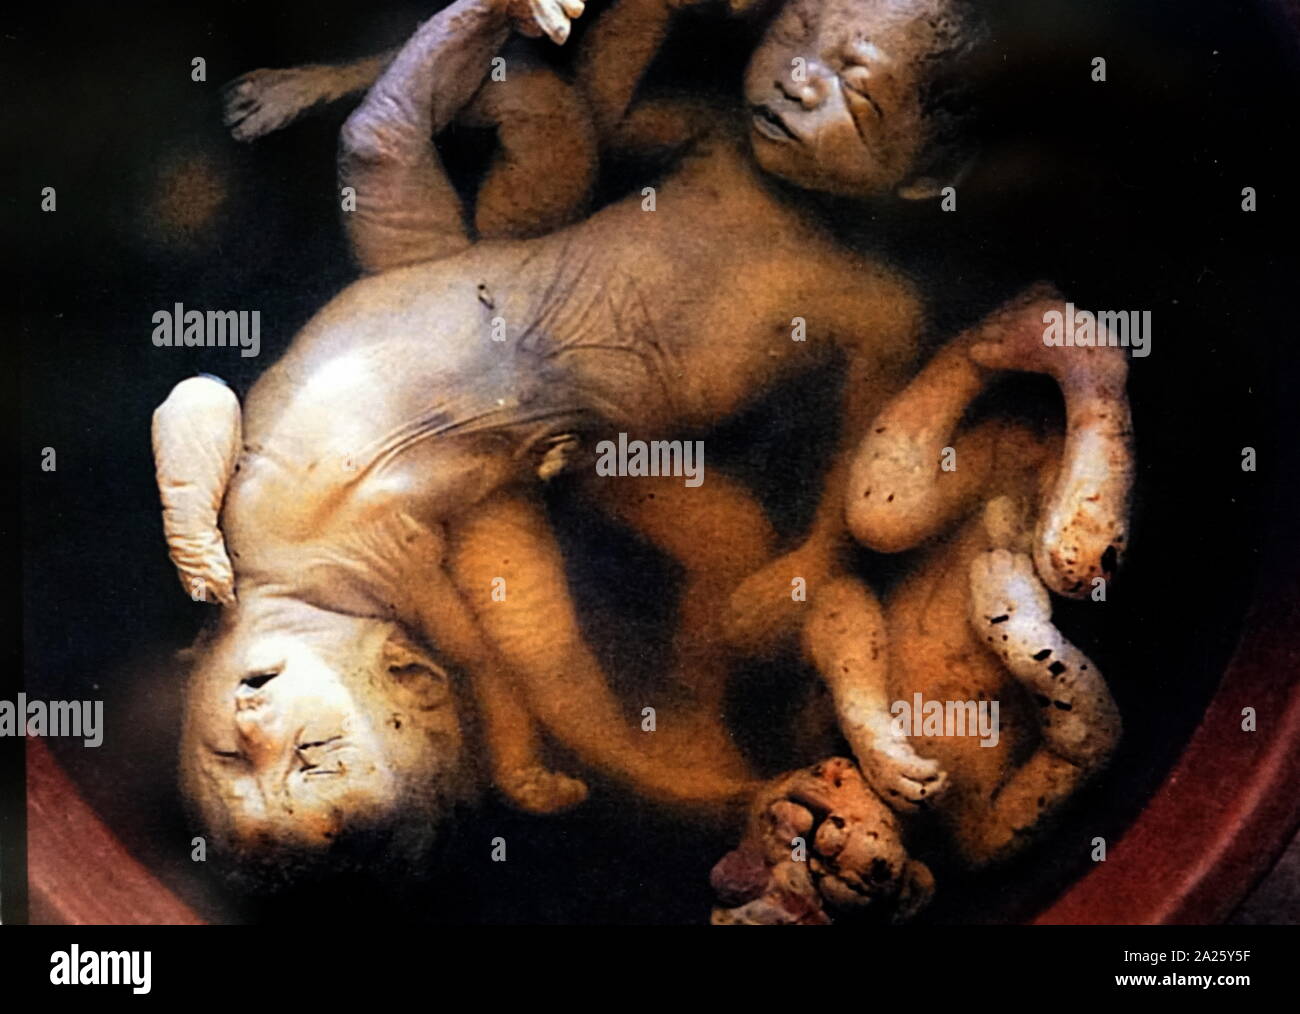 Vietnamese stillborn babies who suffered with deformities as a result of prenatal exposure to dioxin from Agent Orange. Stock Photo